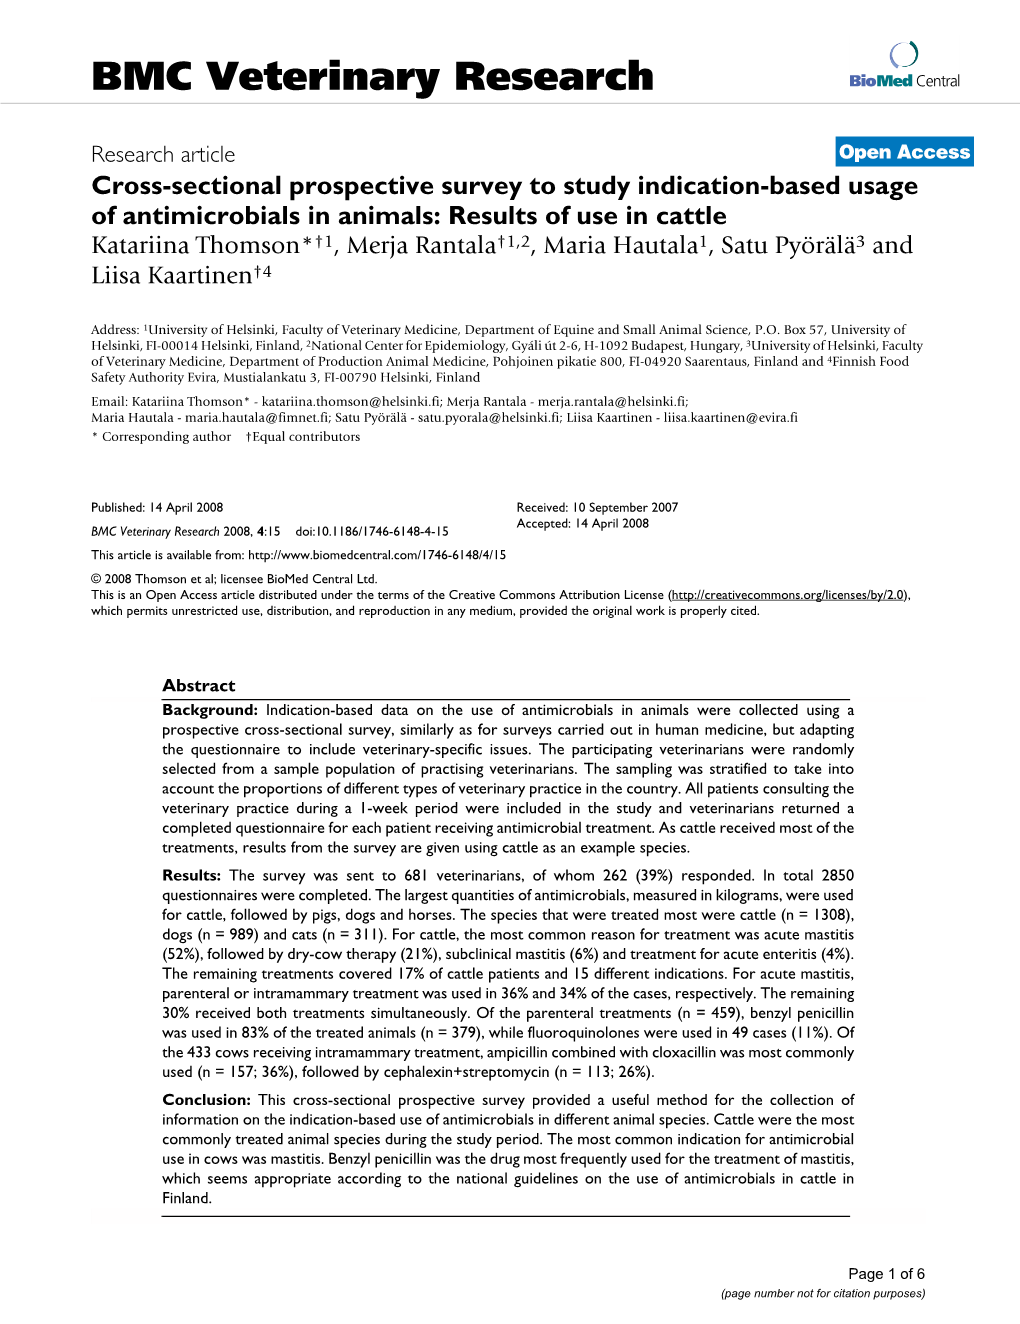 Cross-Sectional Prospective Survey to Study Indication-Based Usage Of